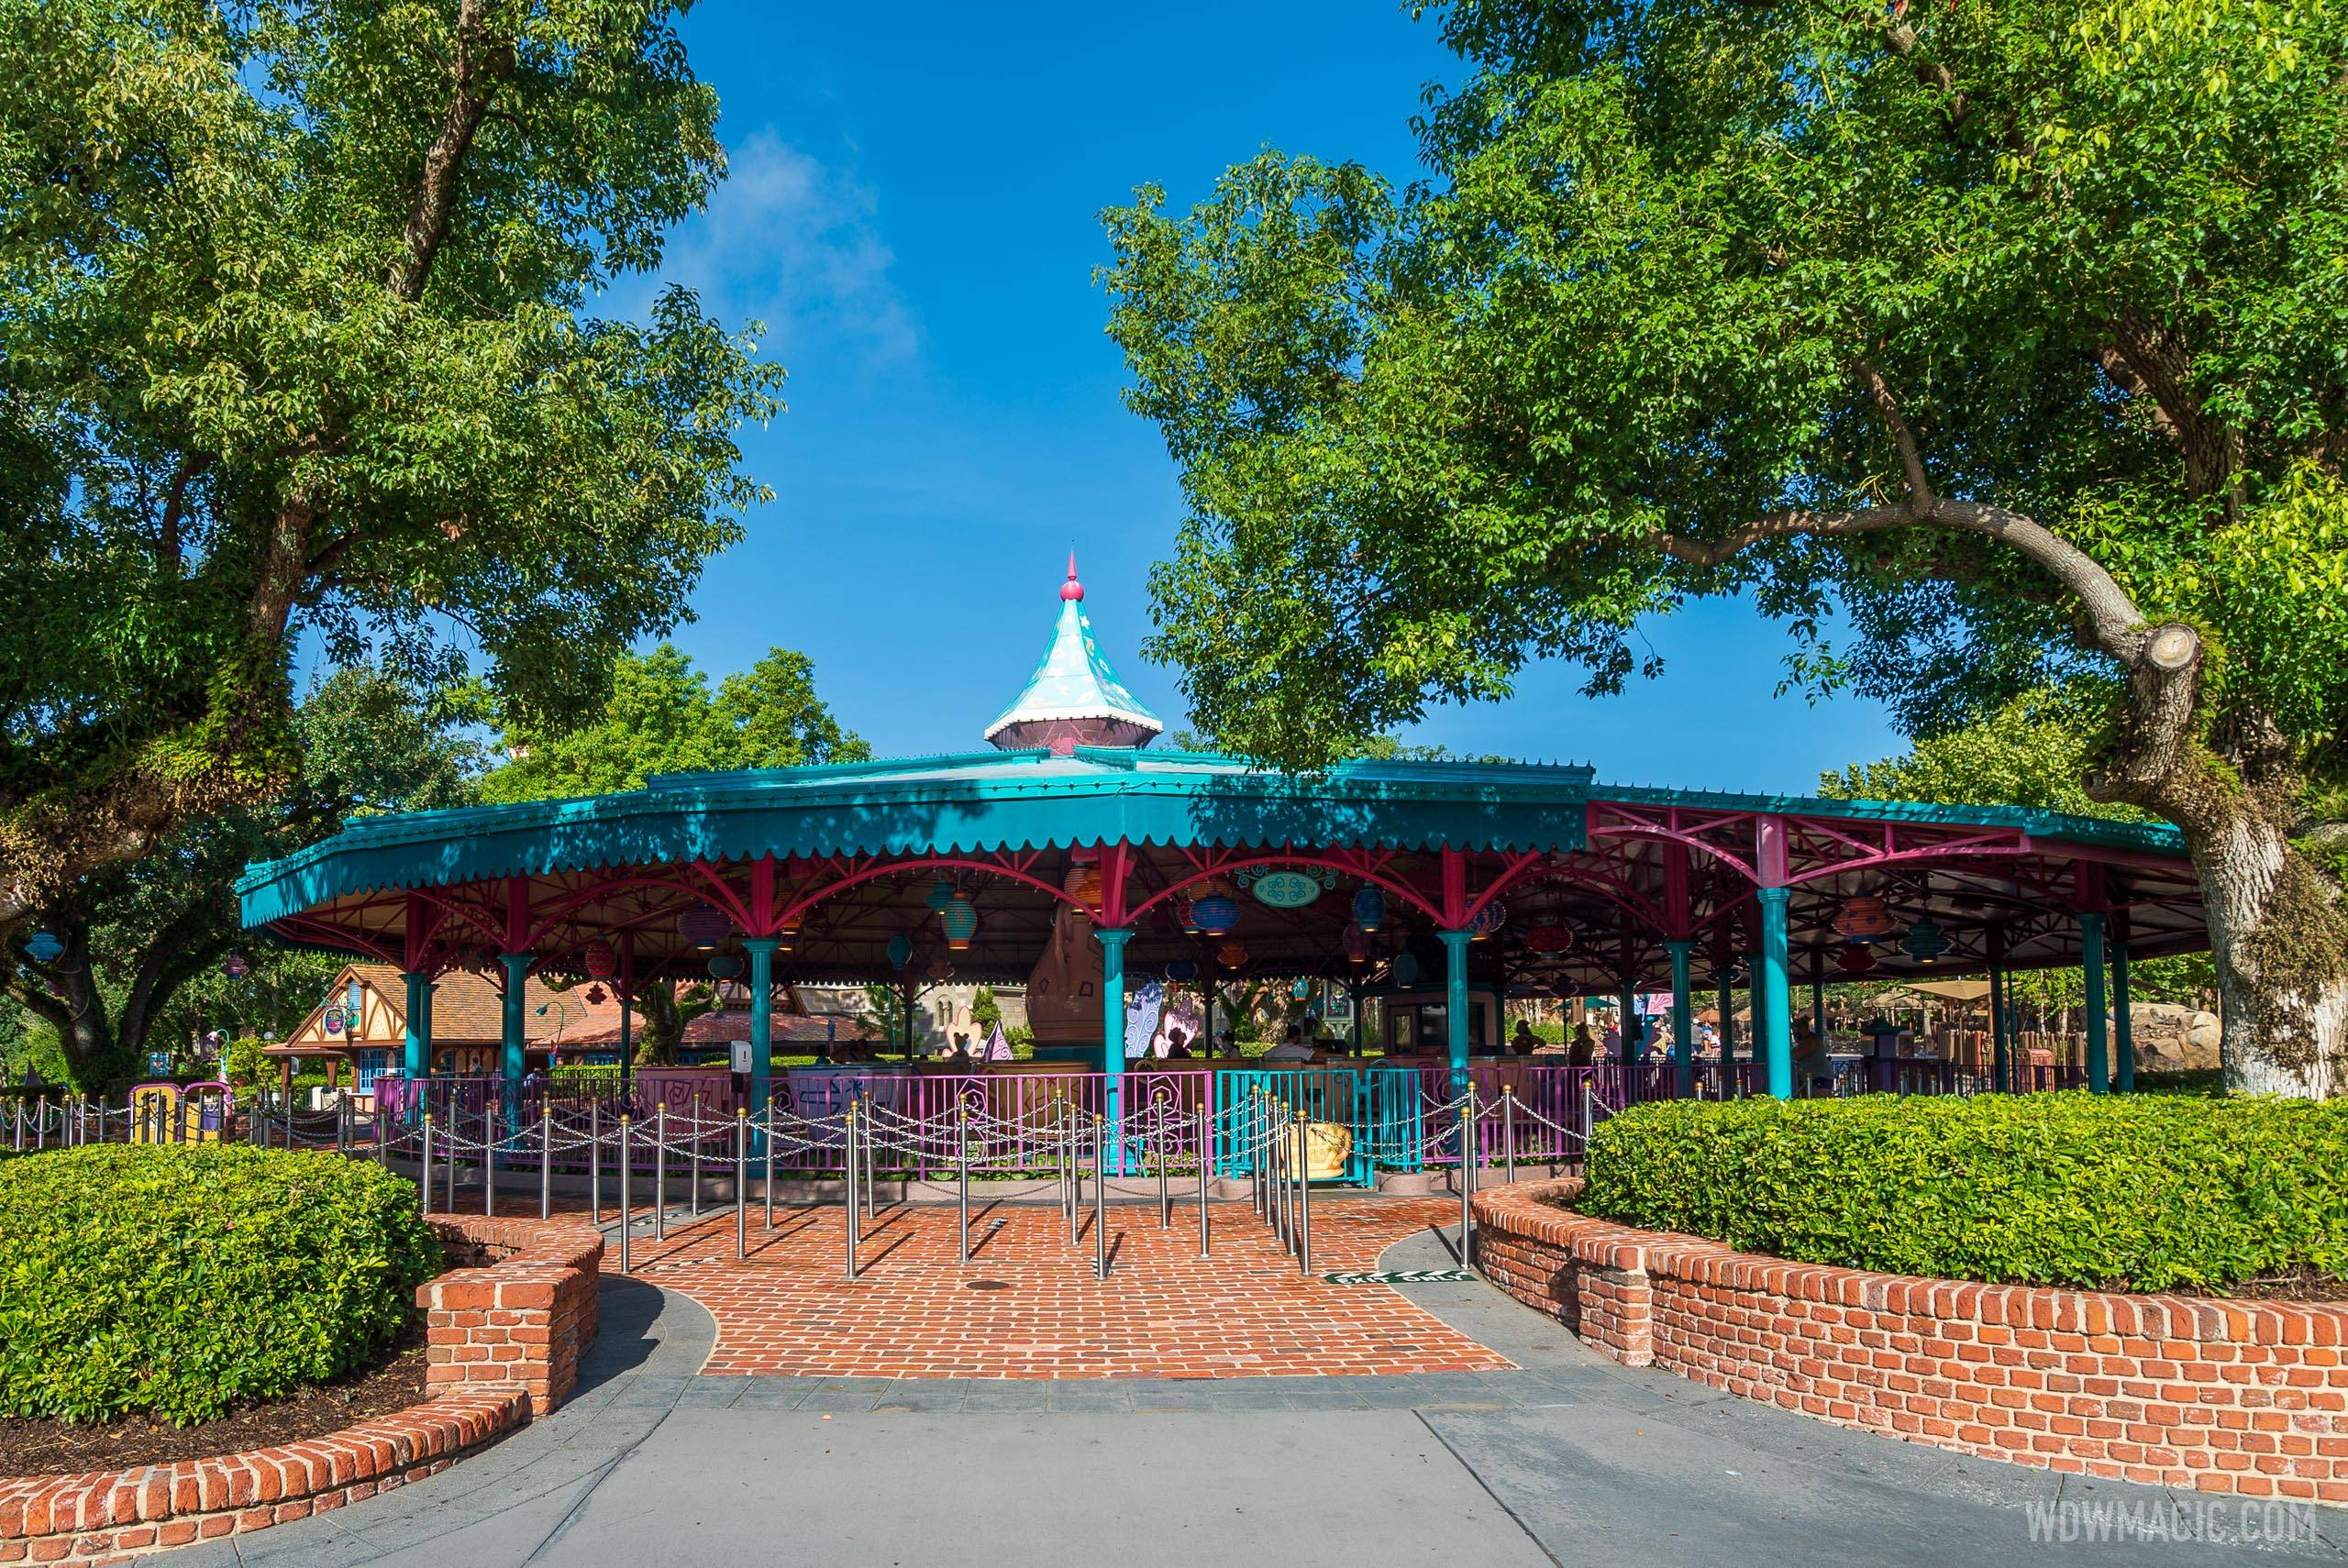 Mad Tea Party closing for refurbishment next month